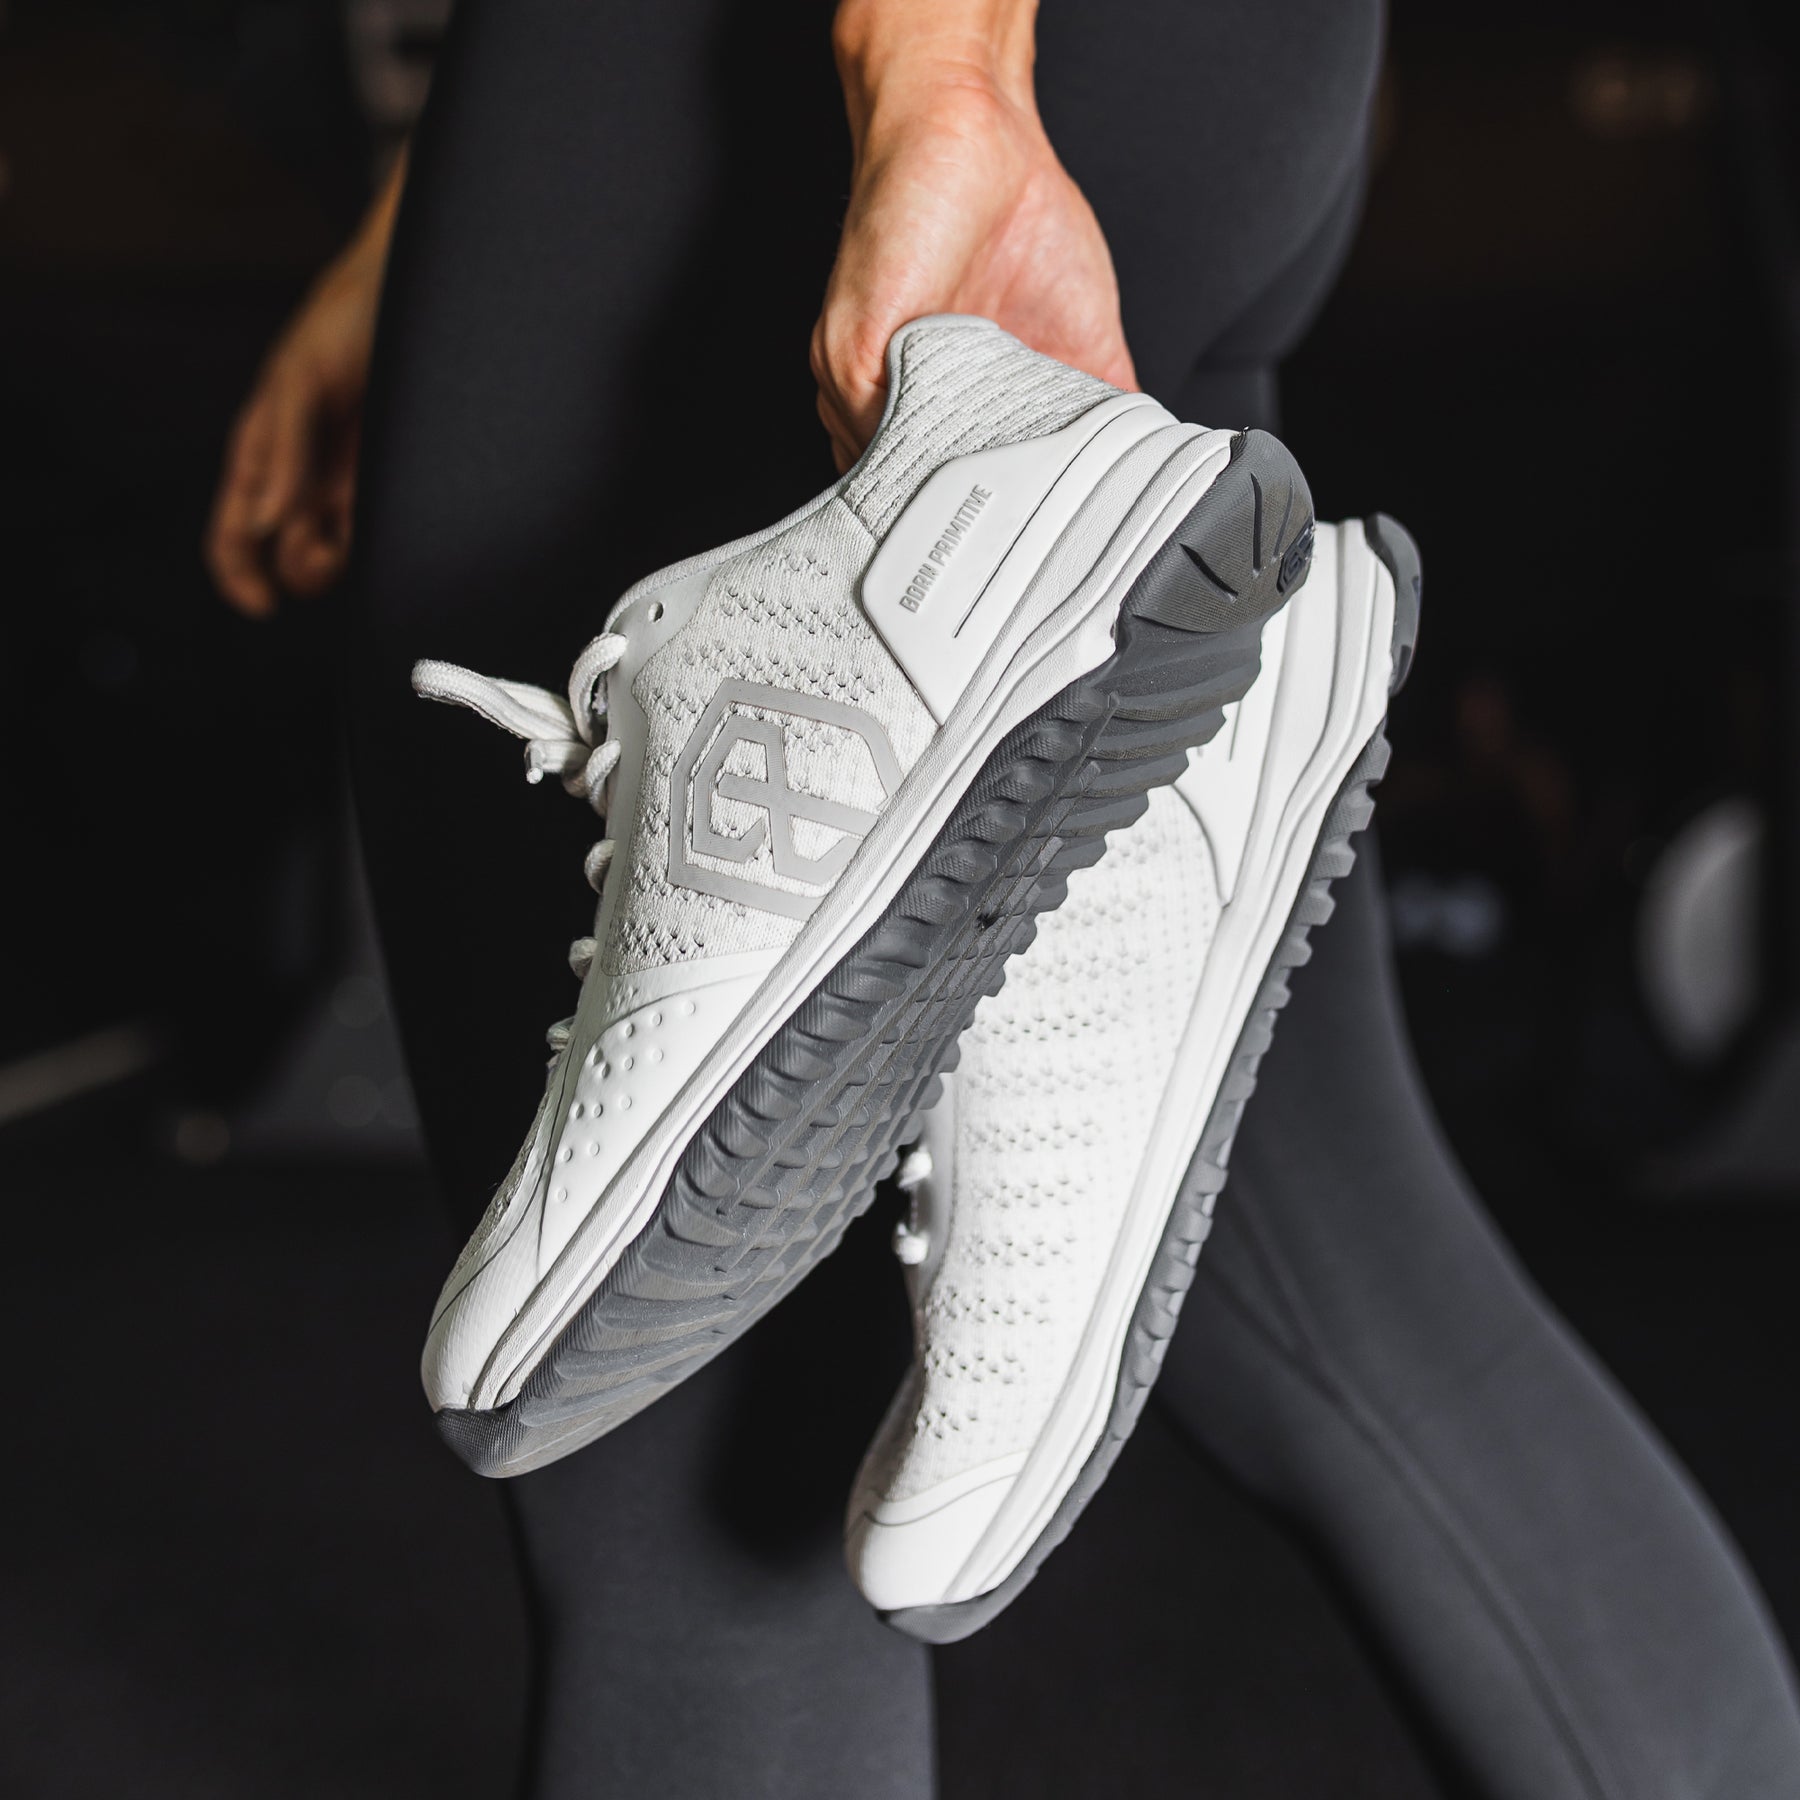 FITNESS APPAREL BRAND BORN PRIMITIVE LAUNCHES ITS FIRST PERFORMANCE SHOE,  THE SAVAGE 1 CROSS TRAINER, ON SEPTEMBER 7